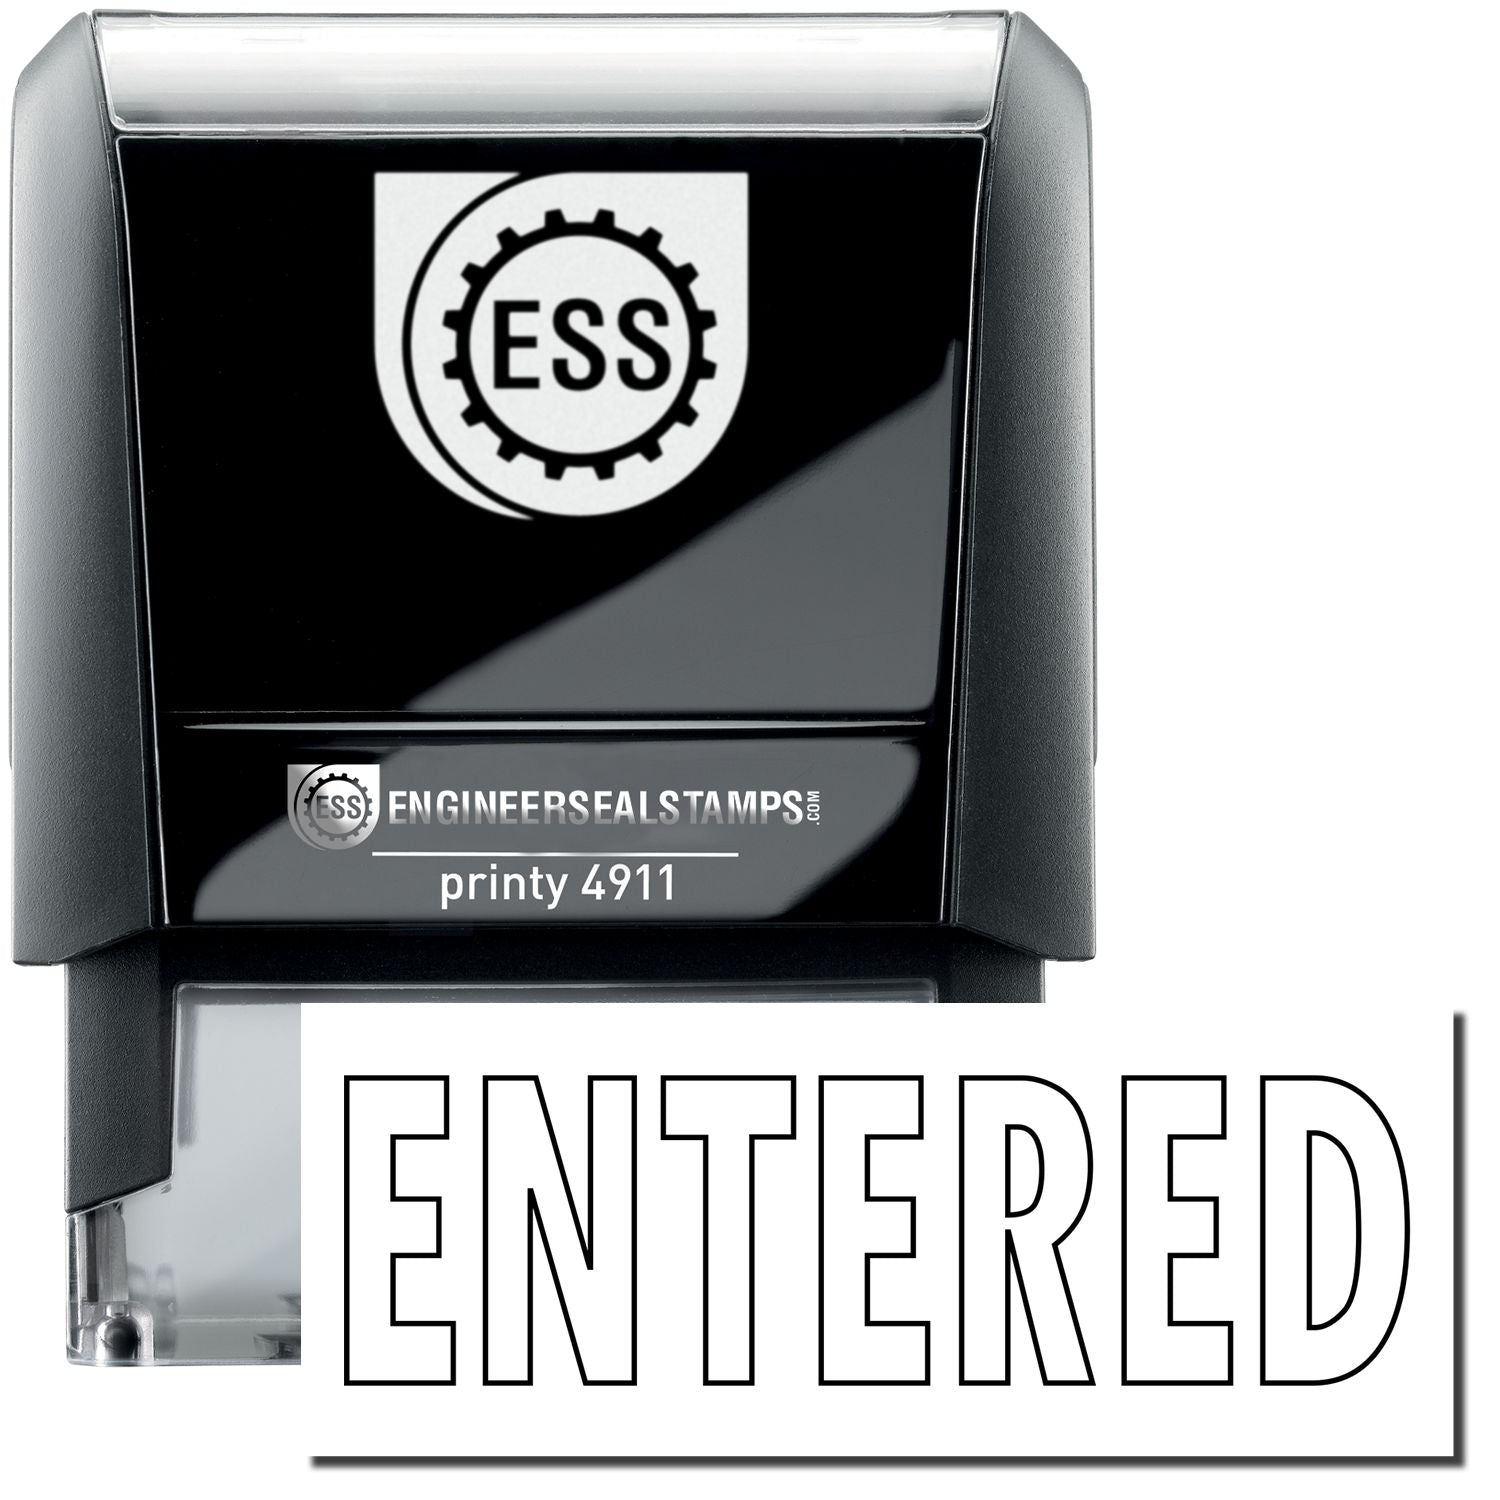 A self-inking stamp with a stamped image showing how the text "ENTERED" in an outline style is displayed after stamping.